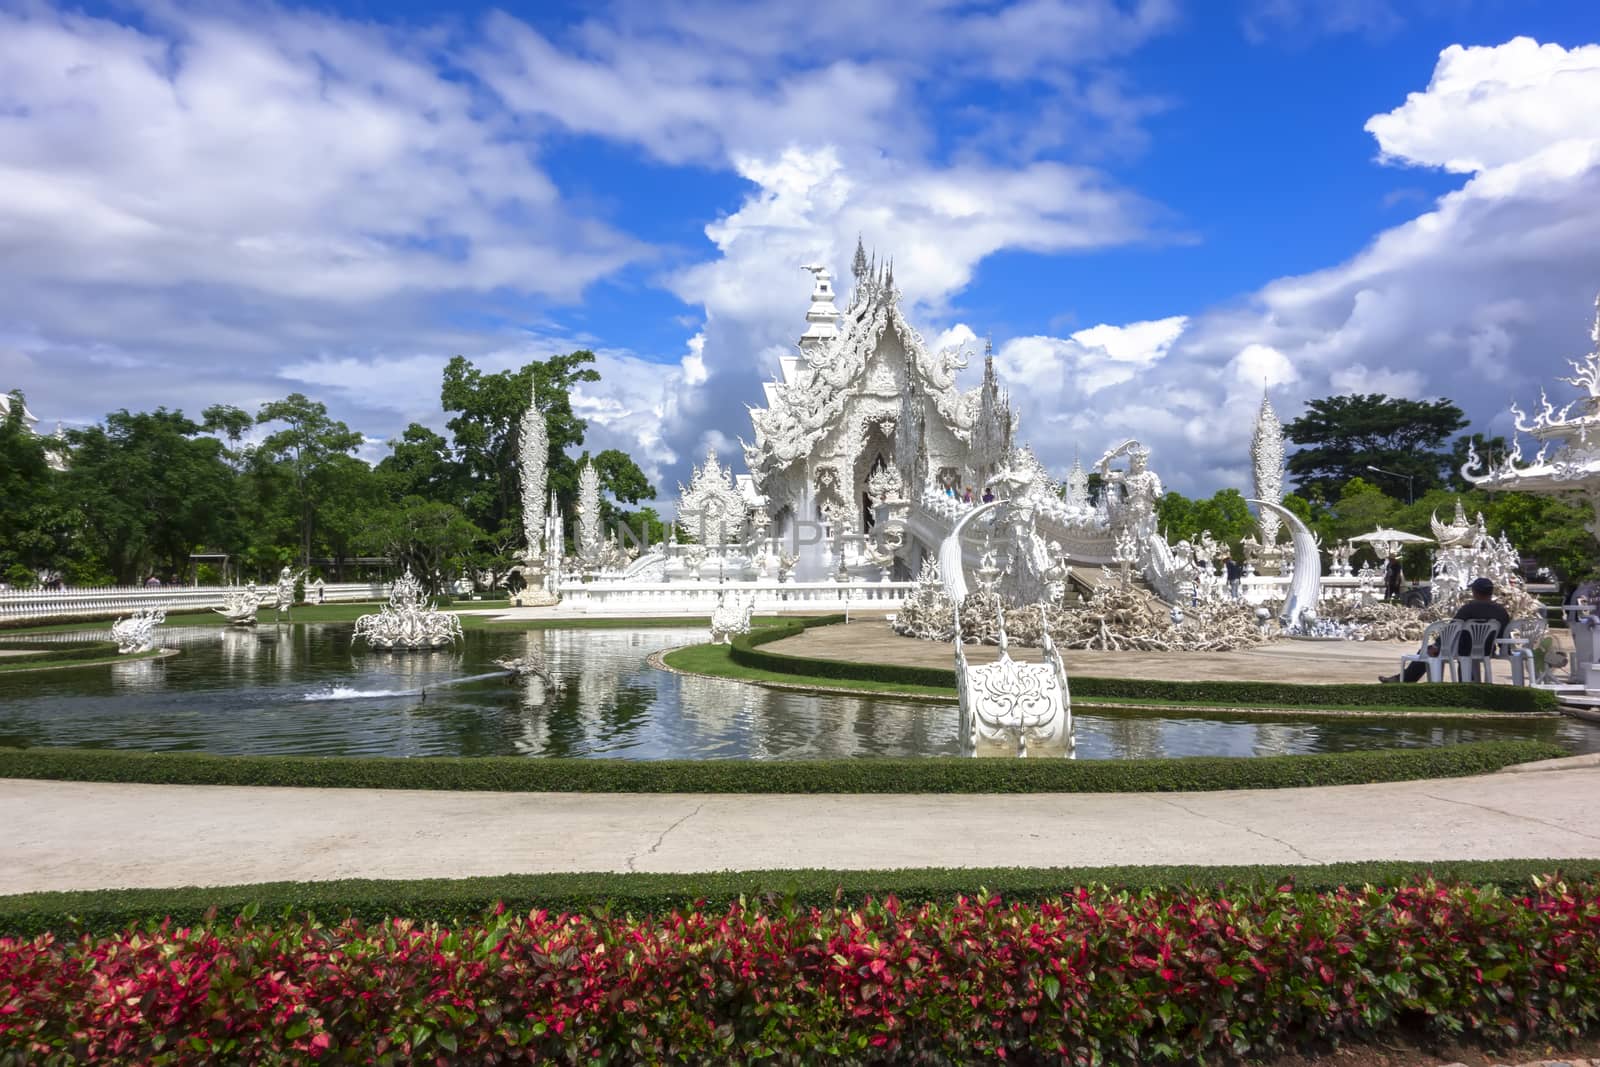 White Temple View. Contemporary unconventional Buddhist temple in Chiang Rai, Thailand.